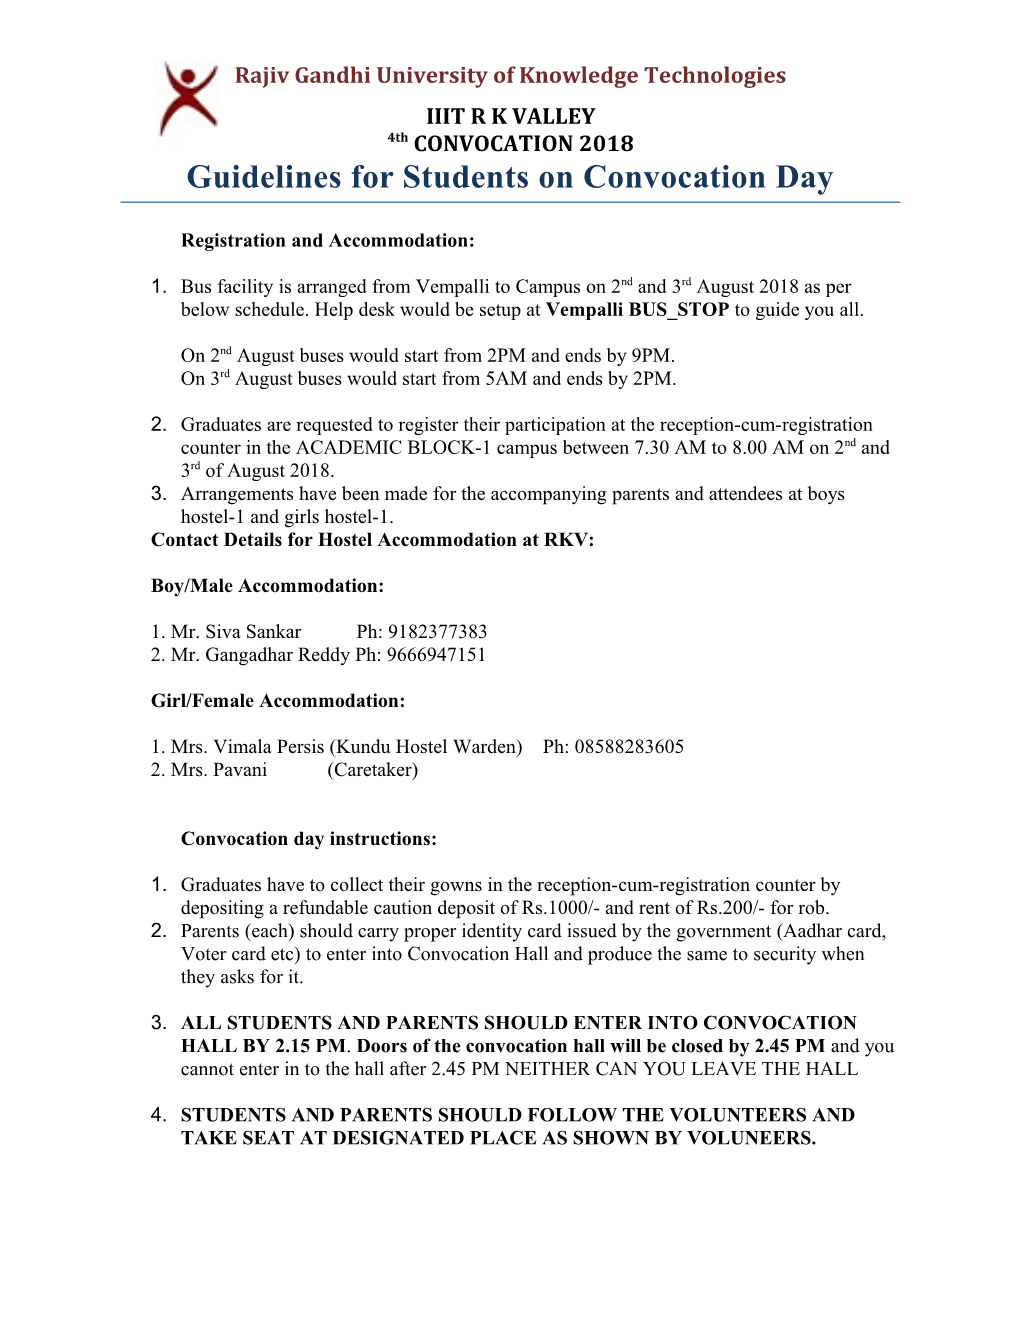 Guidelines for Students on Convocation Day